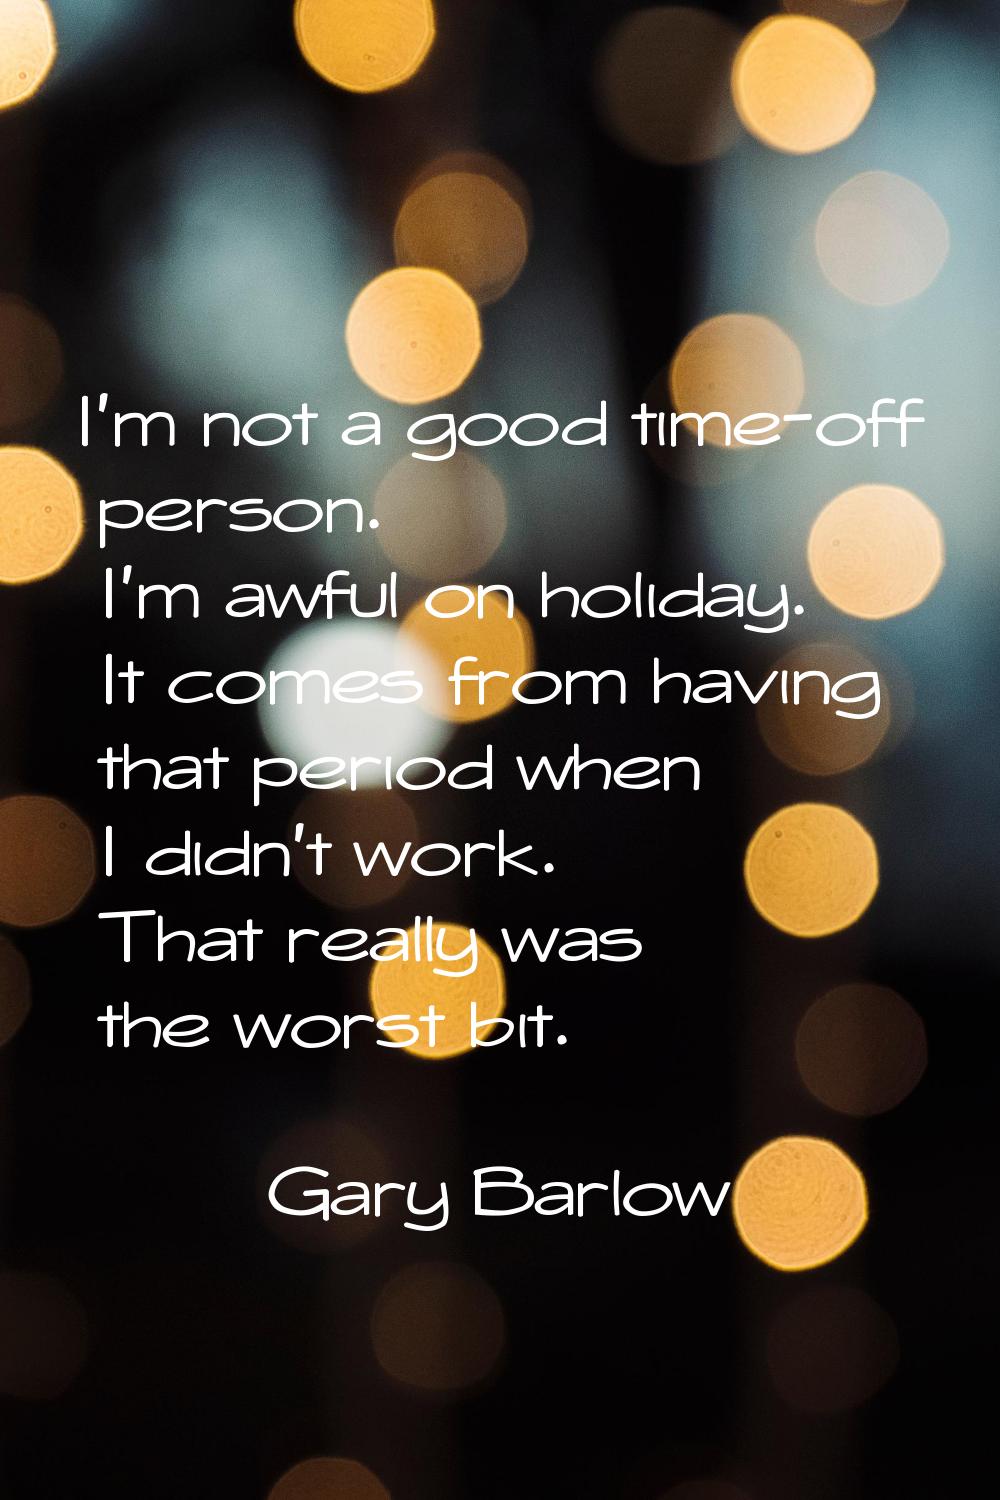 I'm not a good time-off person. I'm awful on holiday. It comes from having that period when I didn'